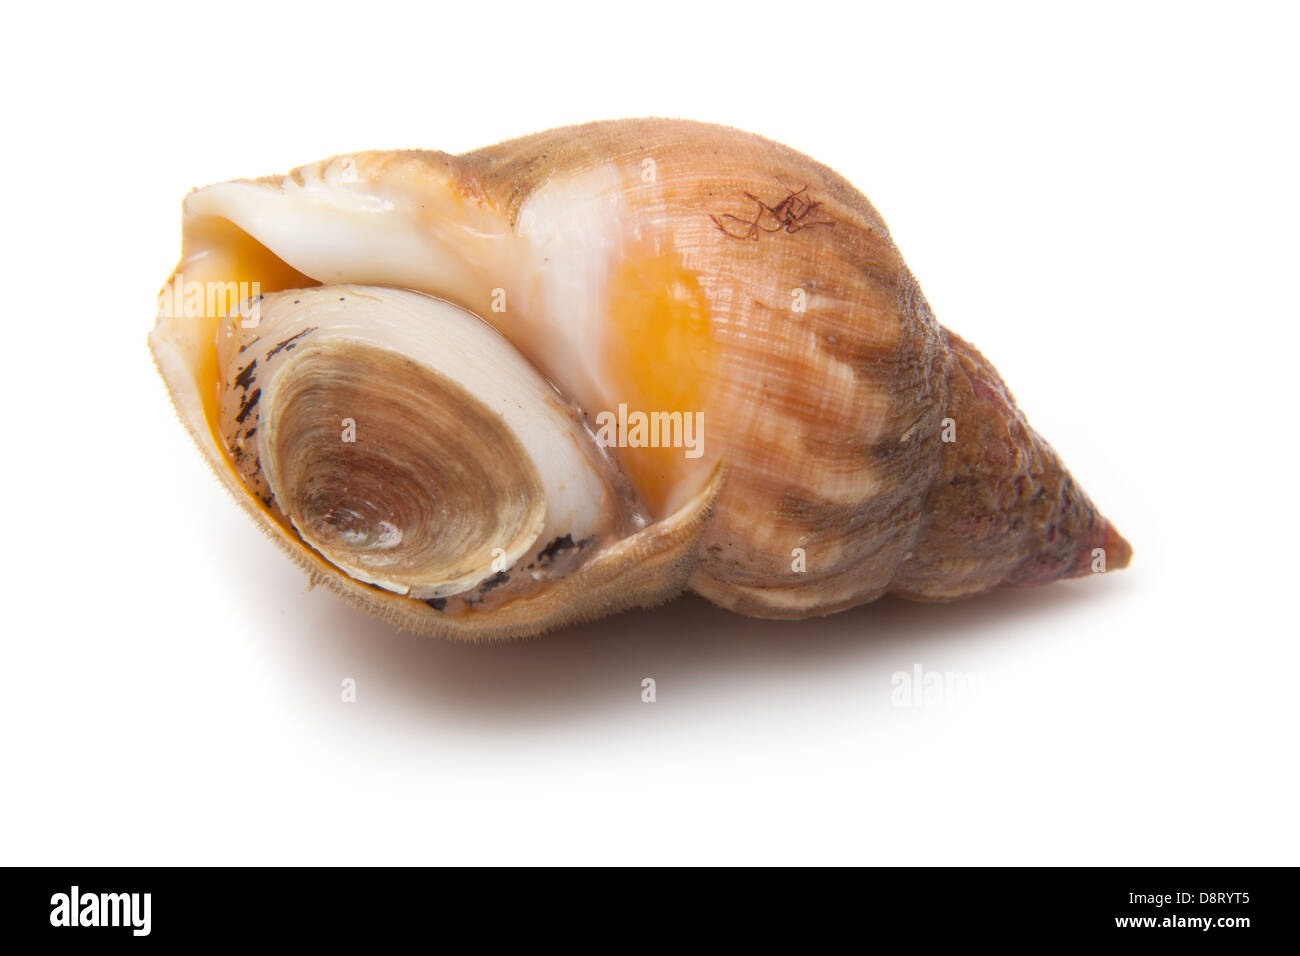 Common whelk or sea snail isolated on a white studio background. Stock Photo